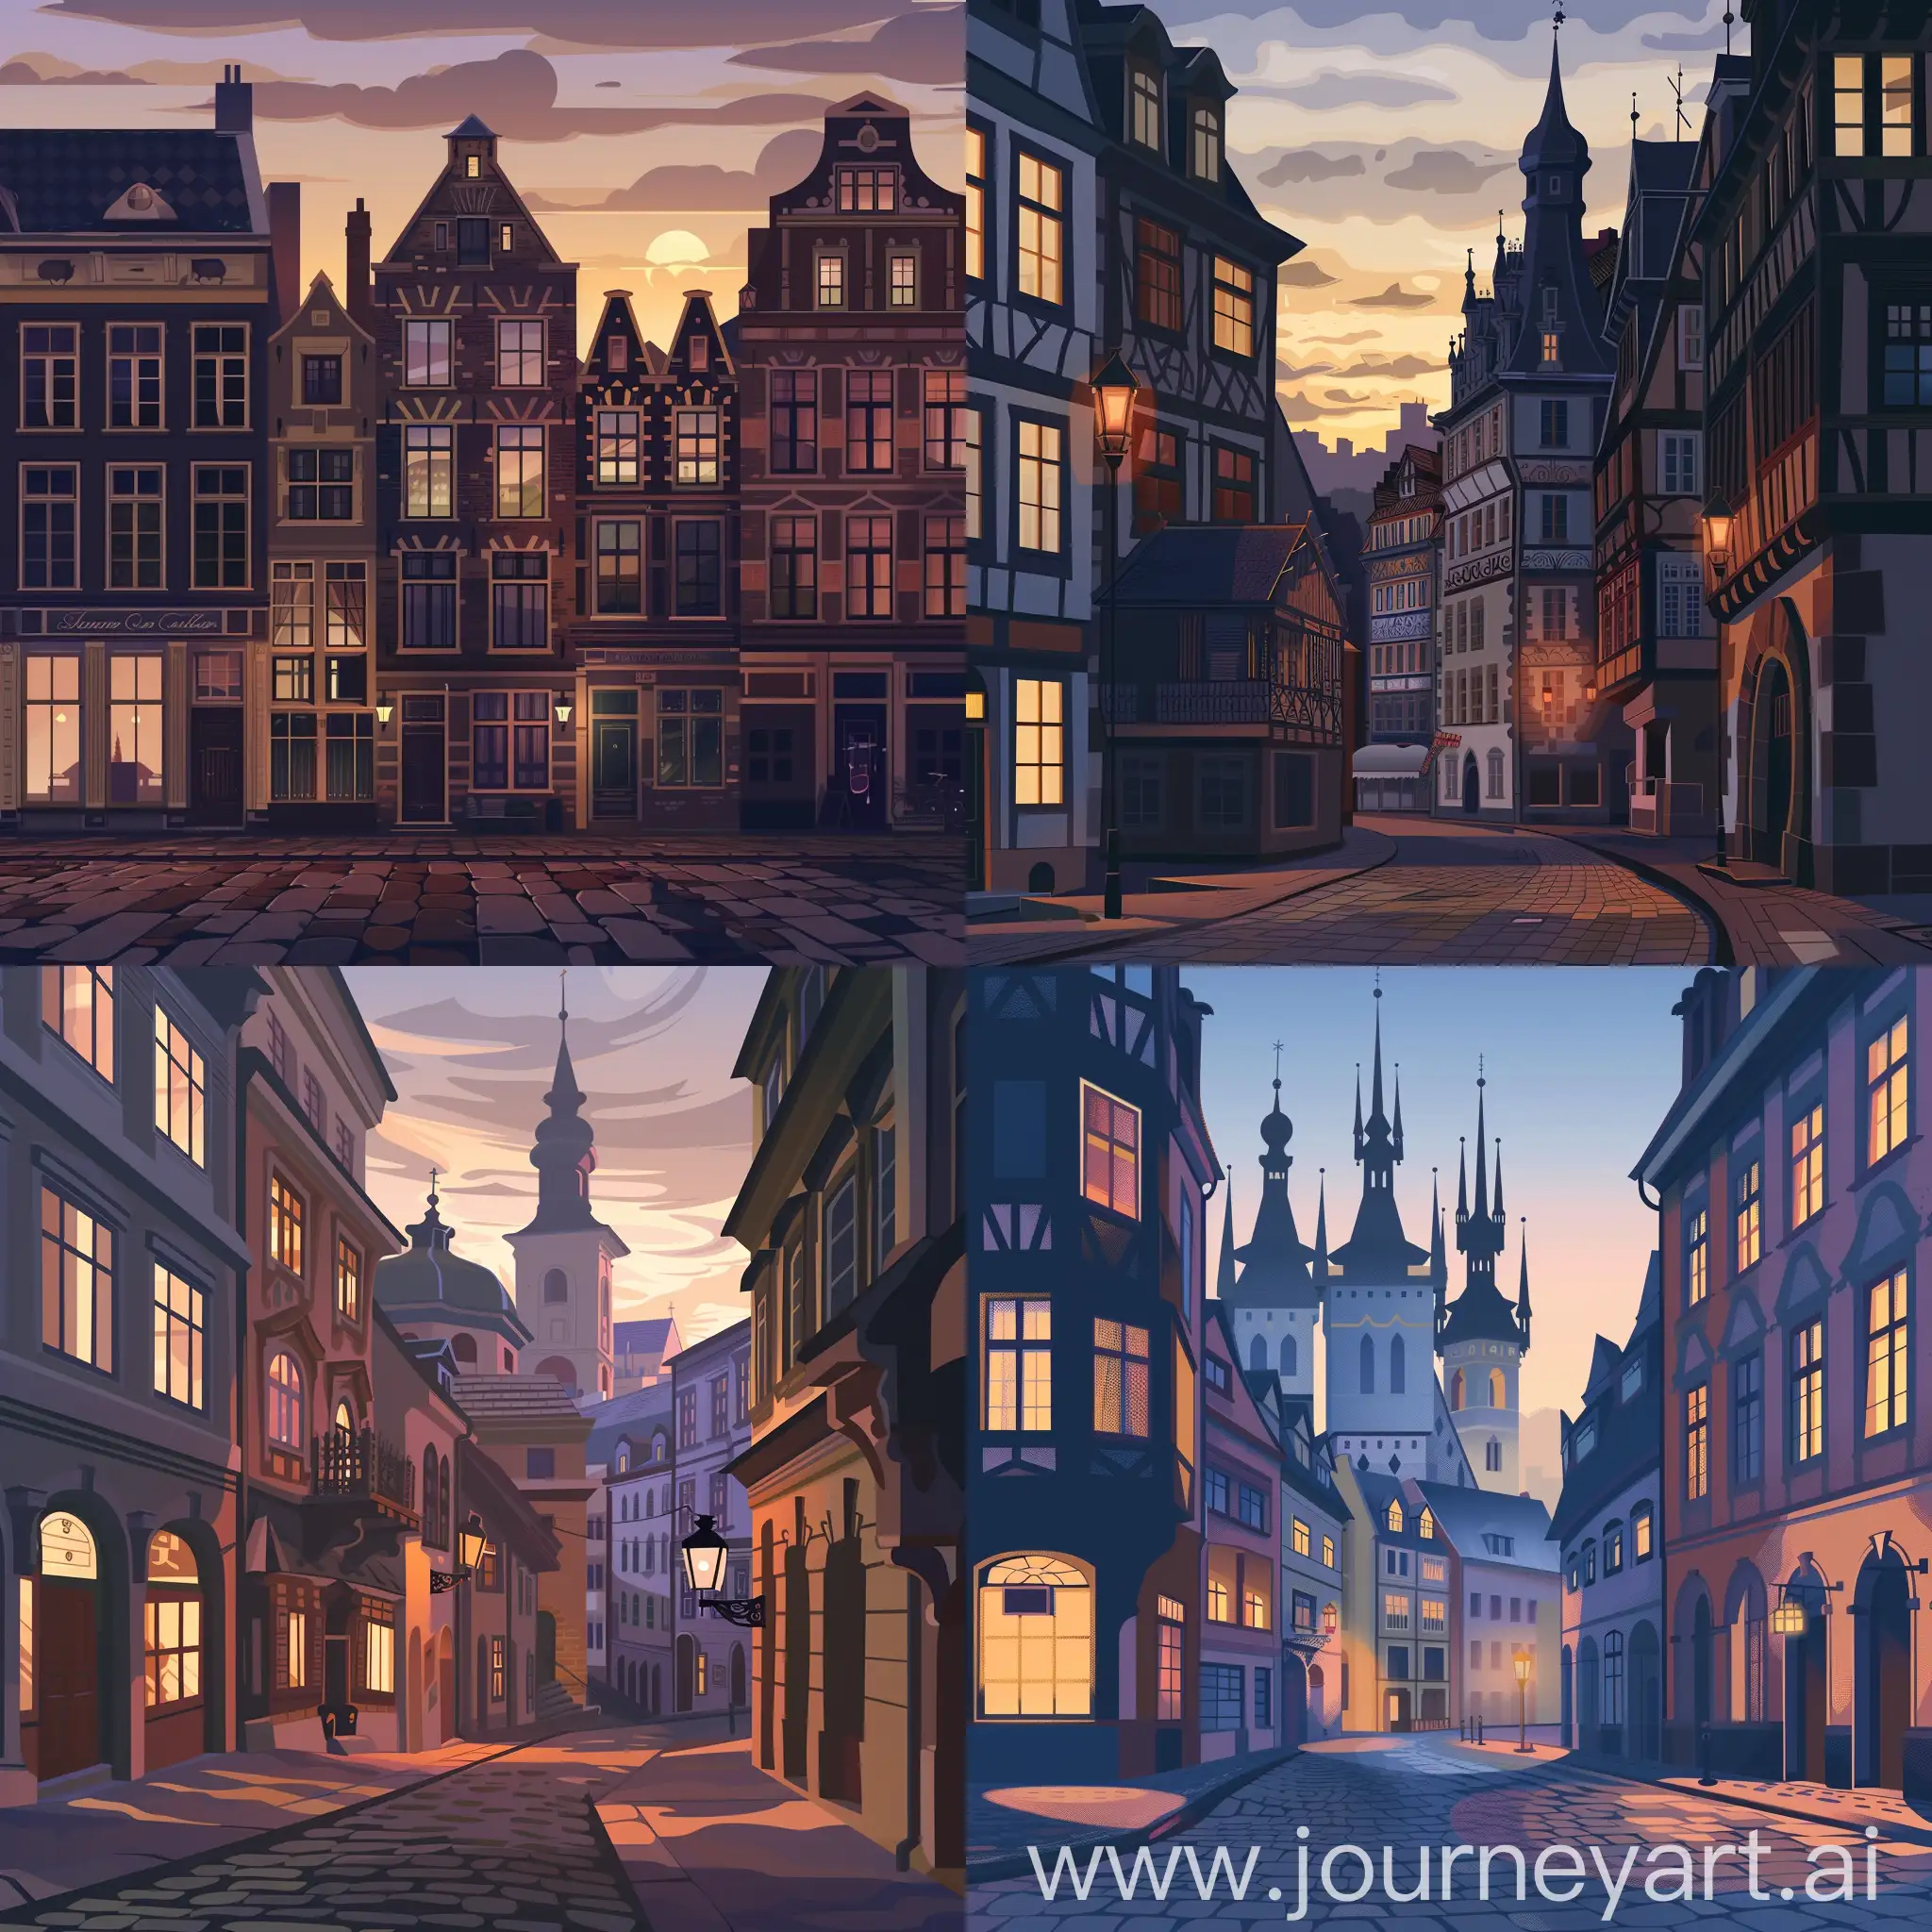 Twilight-in-Historic-European-City-Ancient-Buildings-and-Cobblestone-Streets-Aglow